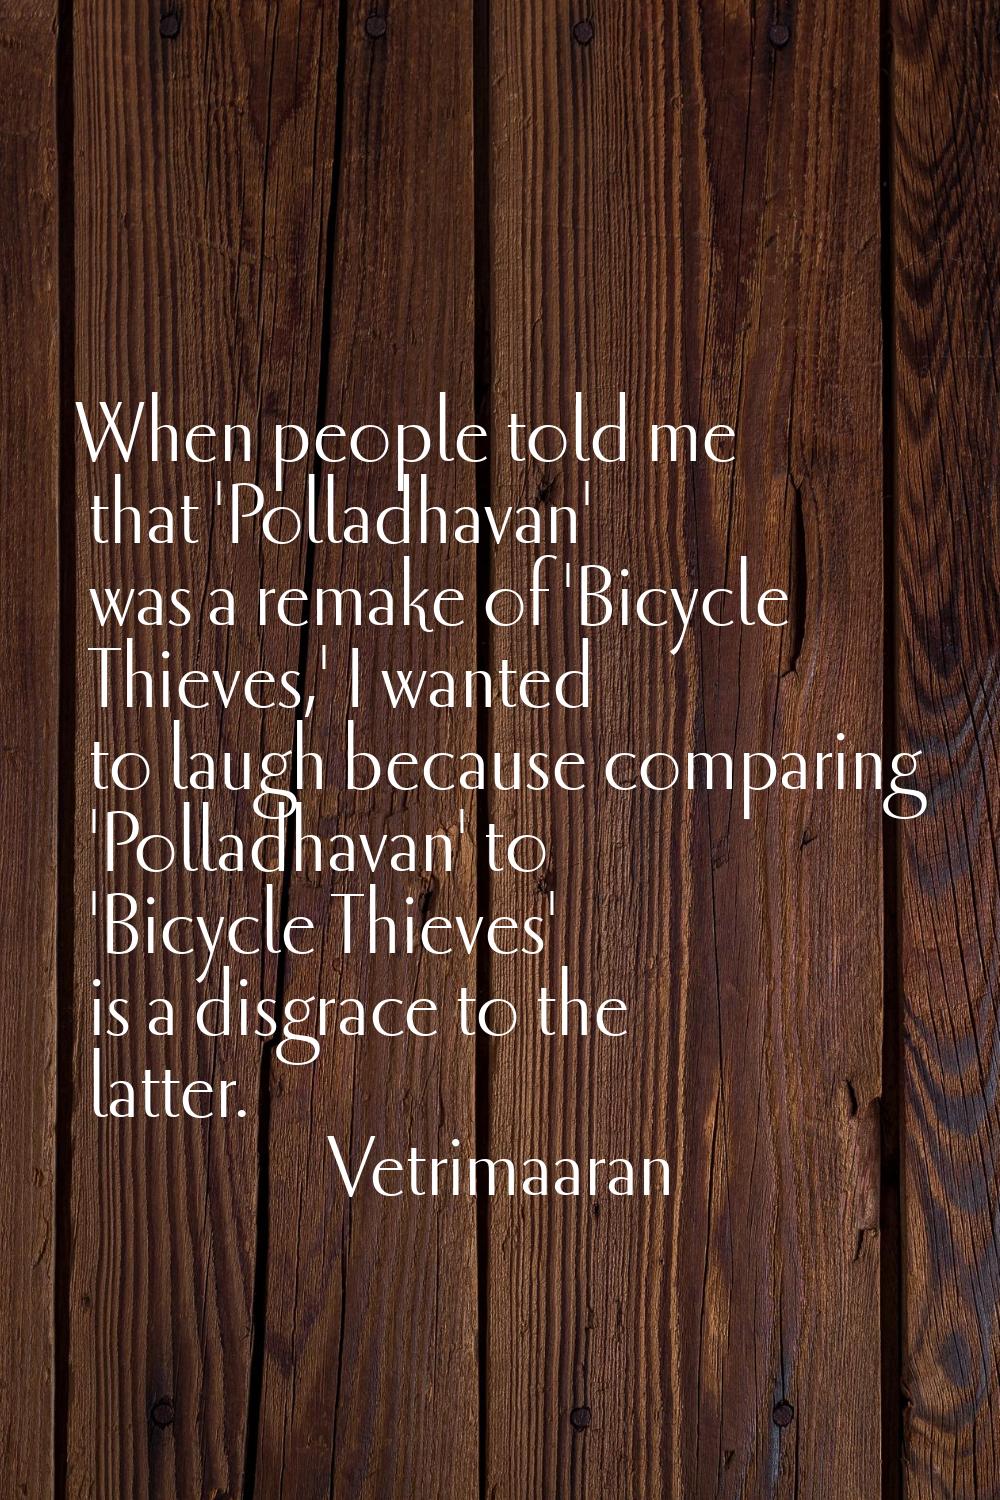 When people told me that 'Polladhavan' was a remake of 'Bicycle Thieves,' I wanted to laugh because